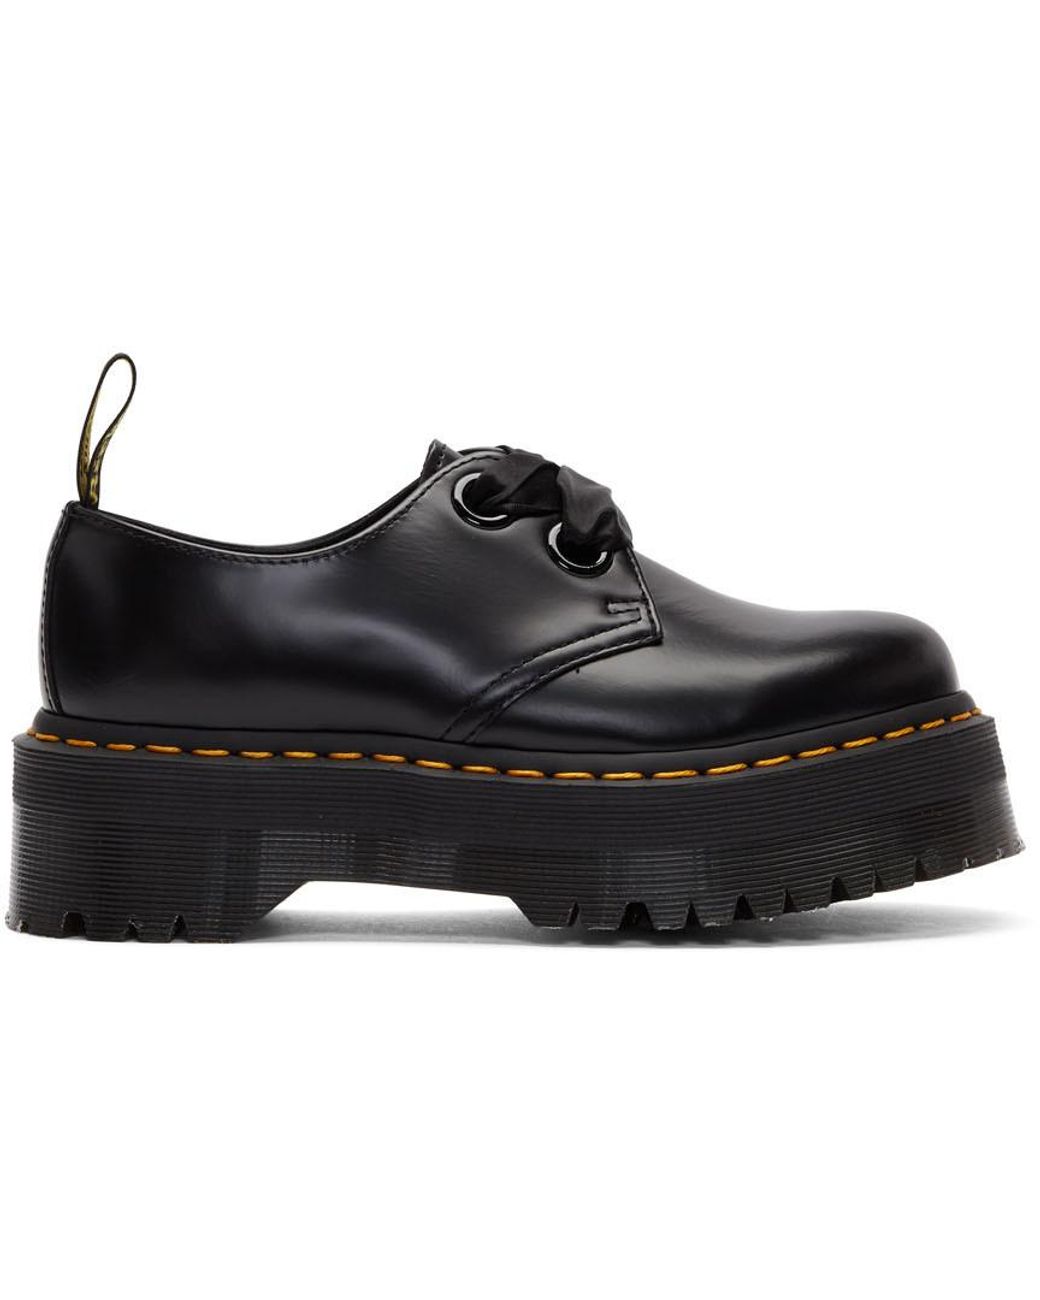 Dr. Martens Ribbon Lace-up Holly Derbys in Black | Lyst